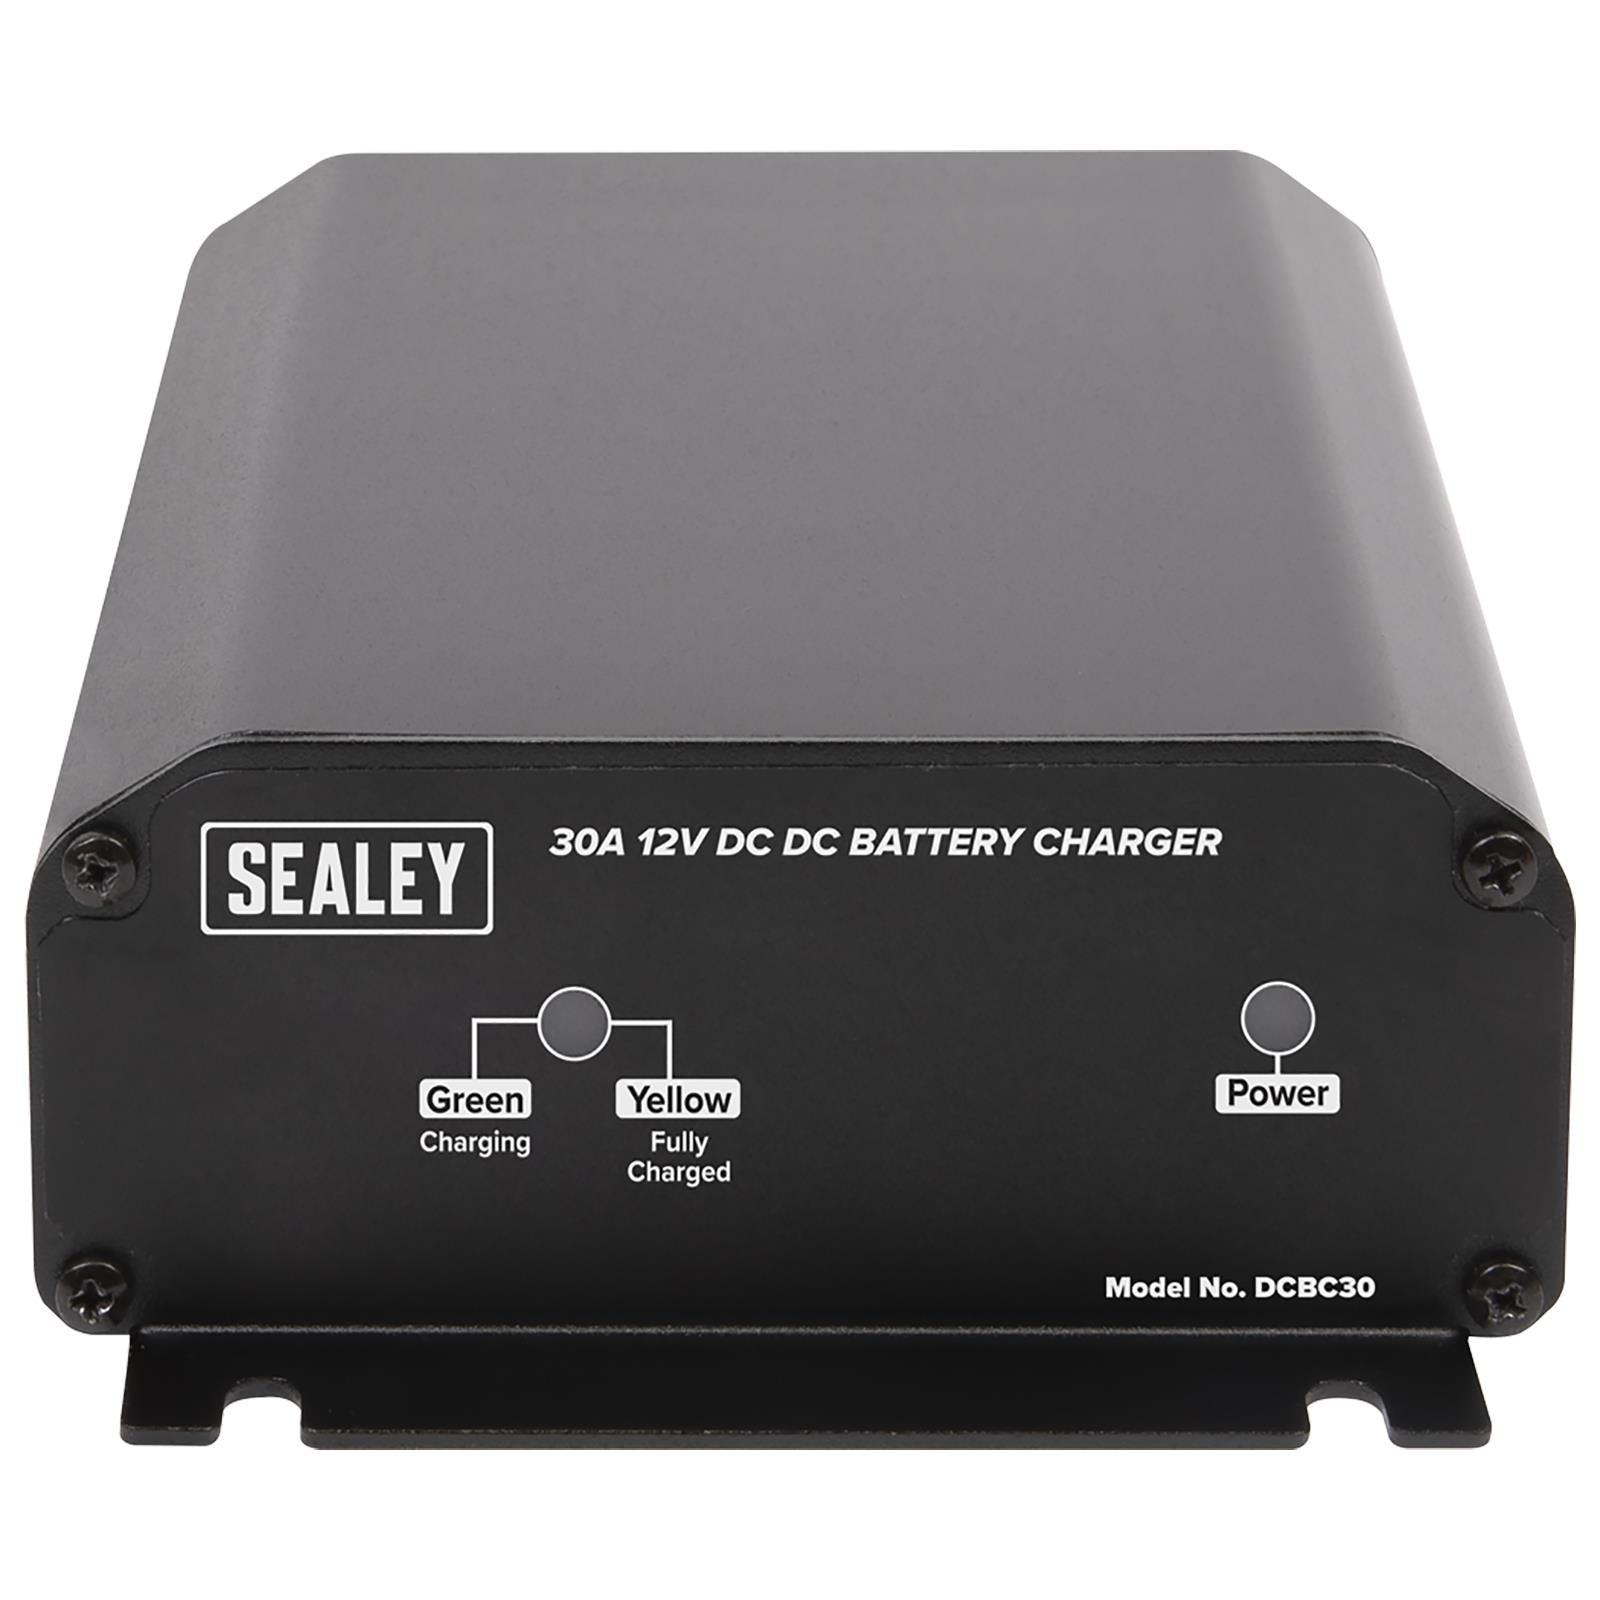 Sealey DC to DC Battery Charger 30A 12V